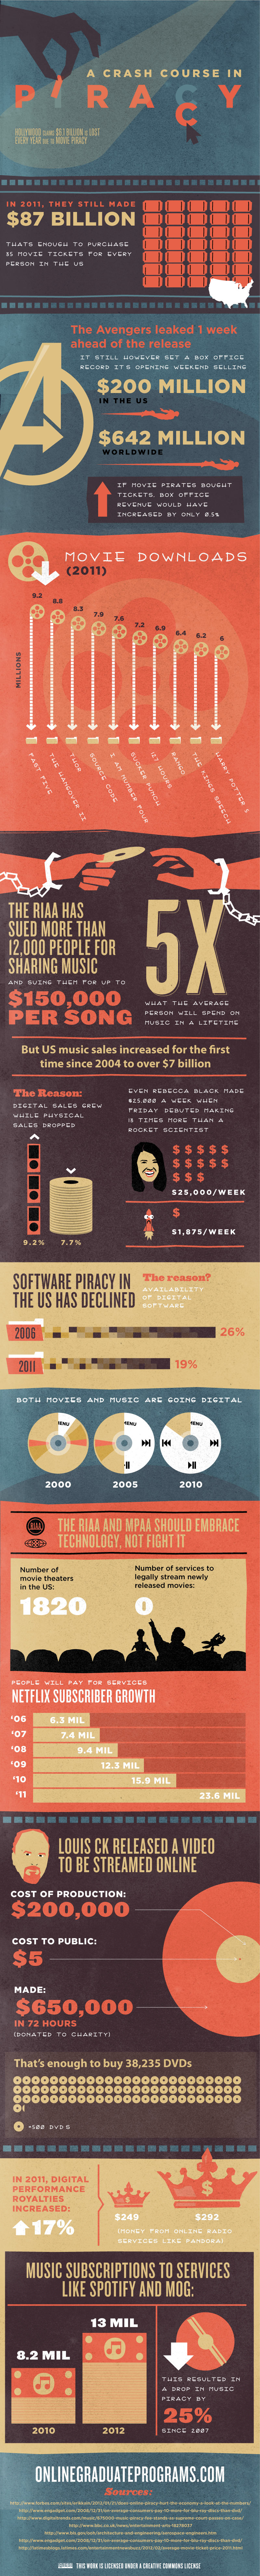 Music, Movies, Programs & Piracy statistic info graphic